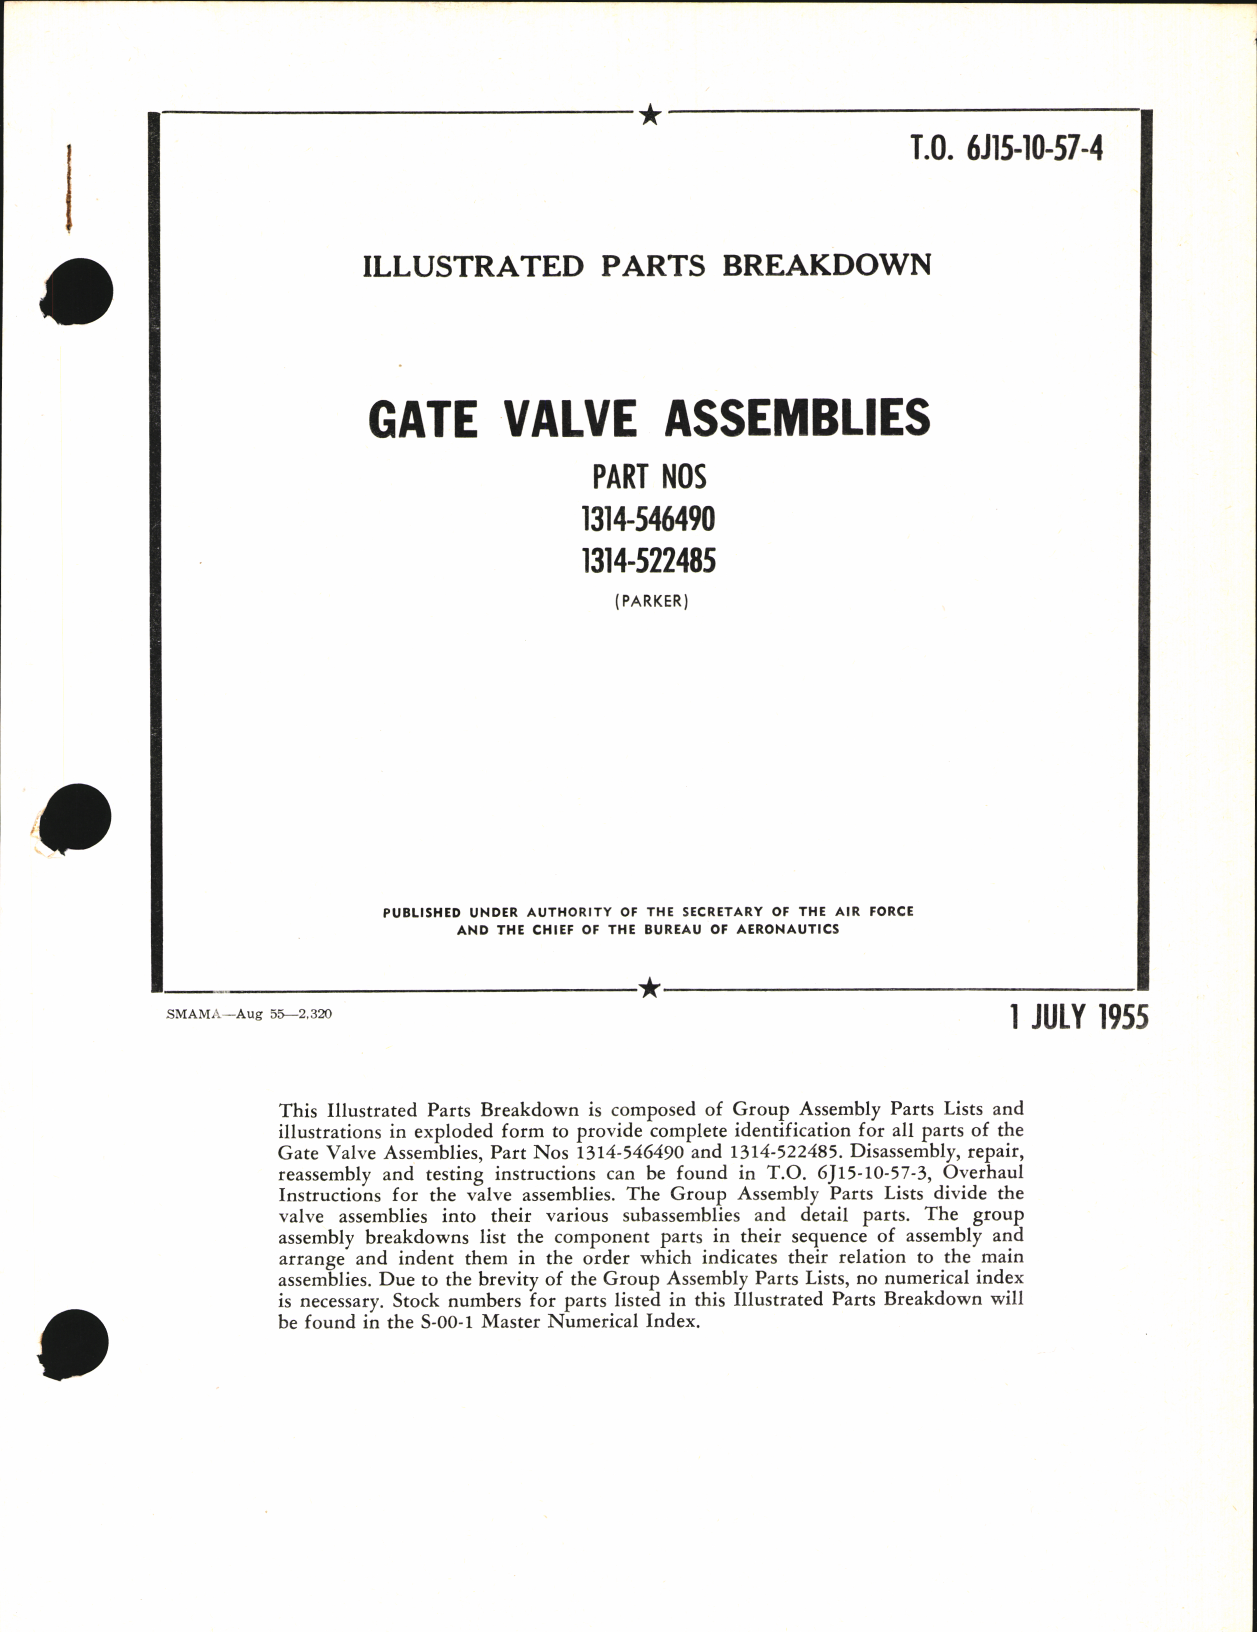 Sample page 1 from AirCorps Library document: Illustrated Parts Breakdown for Gate Valve Assemblies